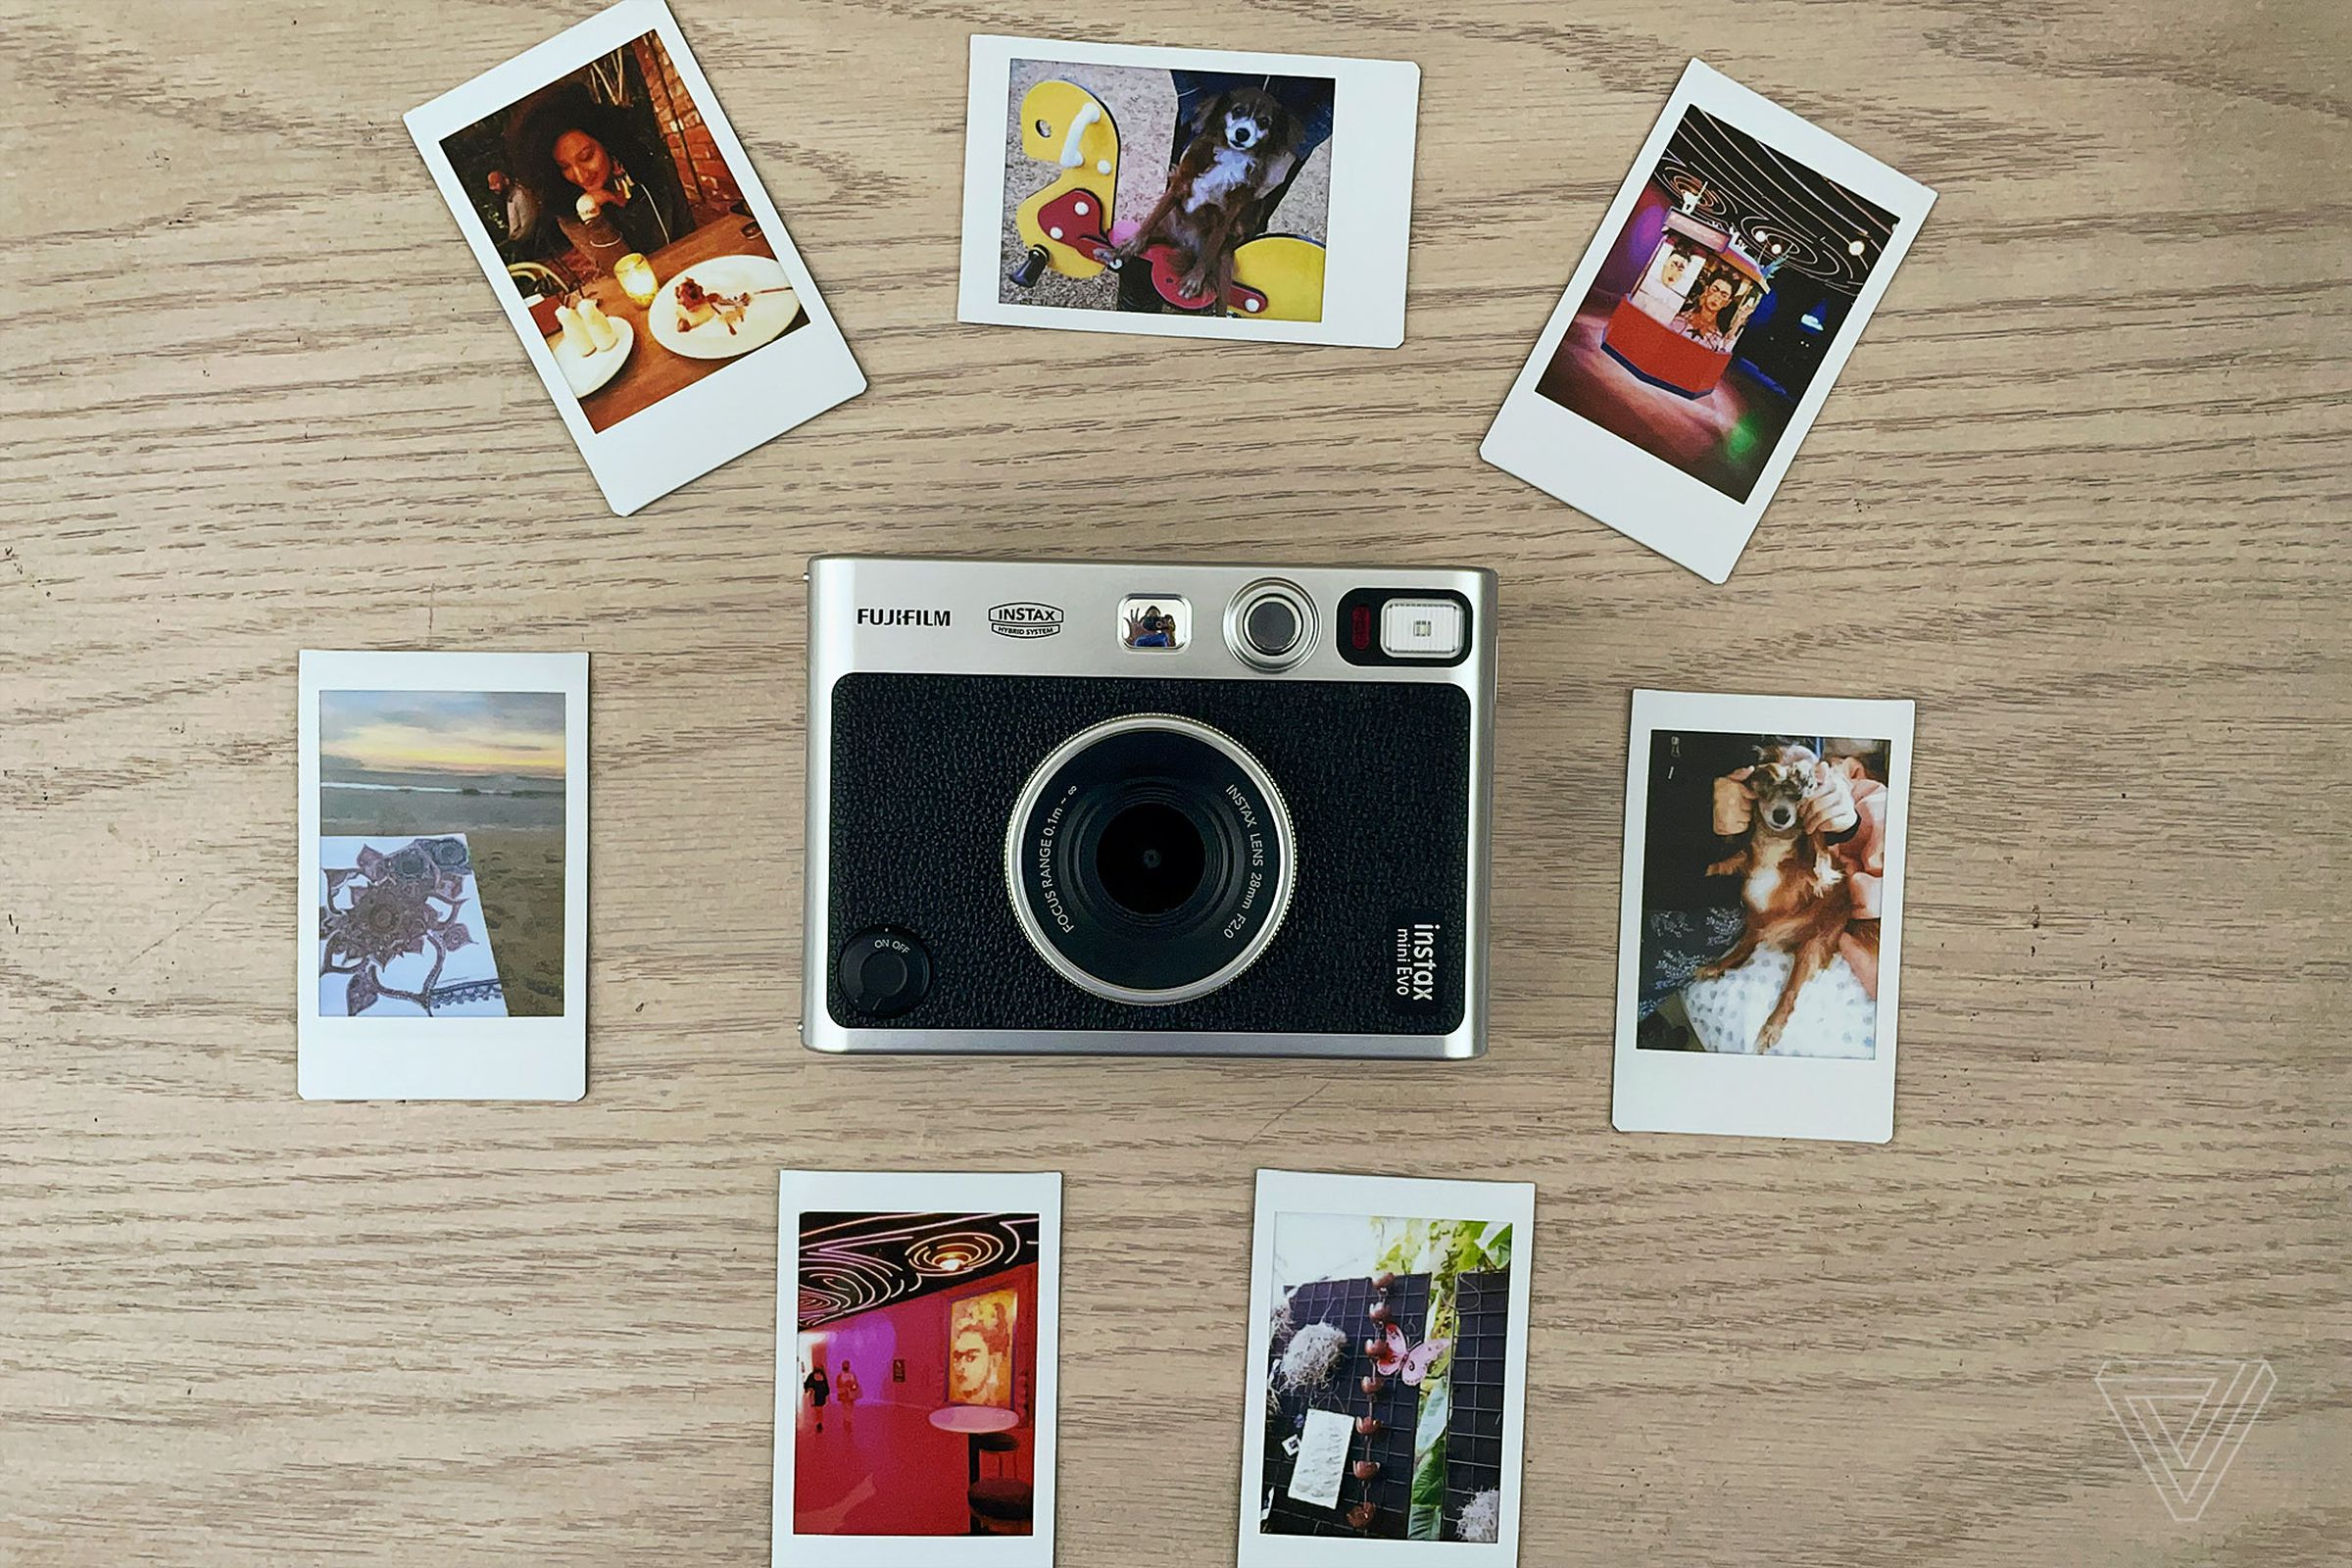 Being able to adjust the brightness of the prints helped me capture night photos and a low-light immersive exhibit a little more clearly and realistically, which is a feature the Instax Mini 11 doesn’t offer.